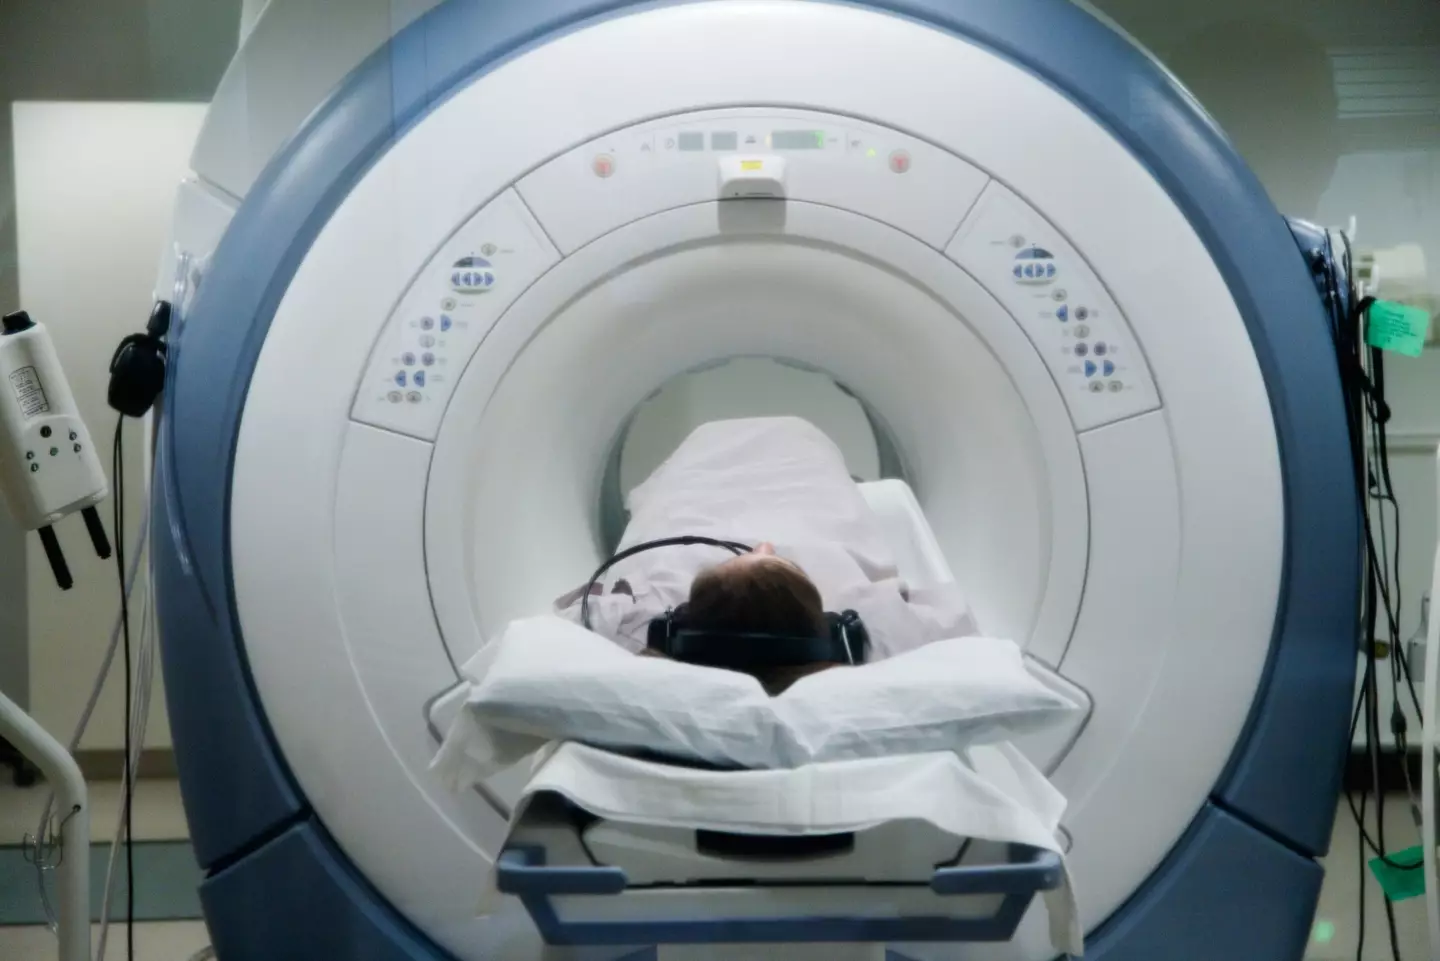 Tumours were undetected in physical exams, MRIs and PET scans.